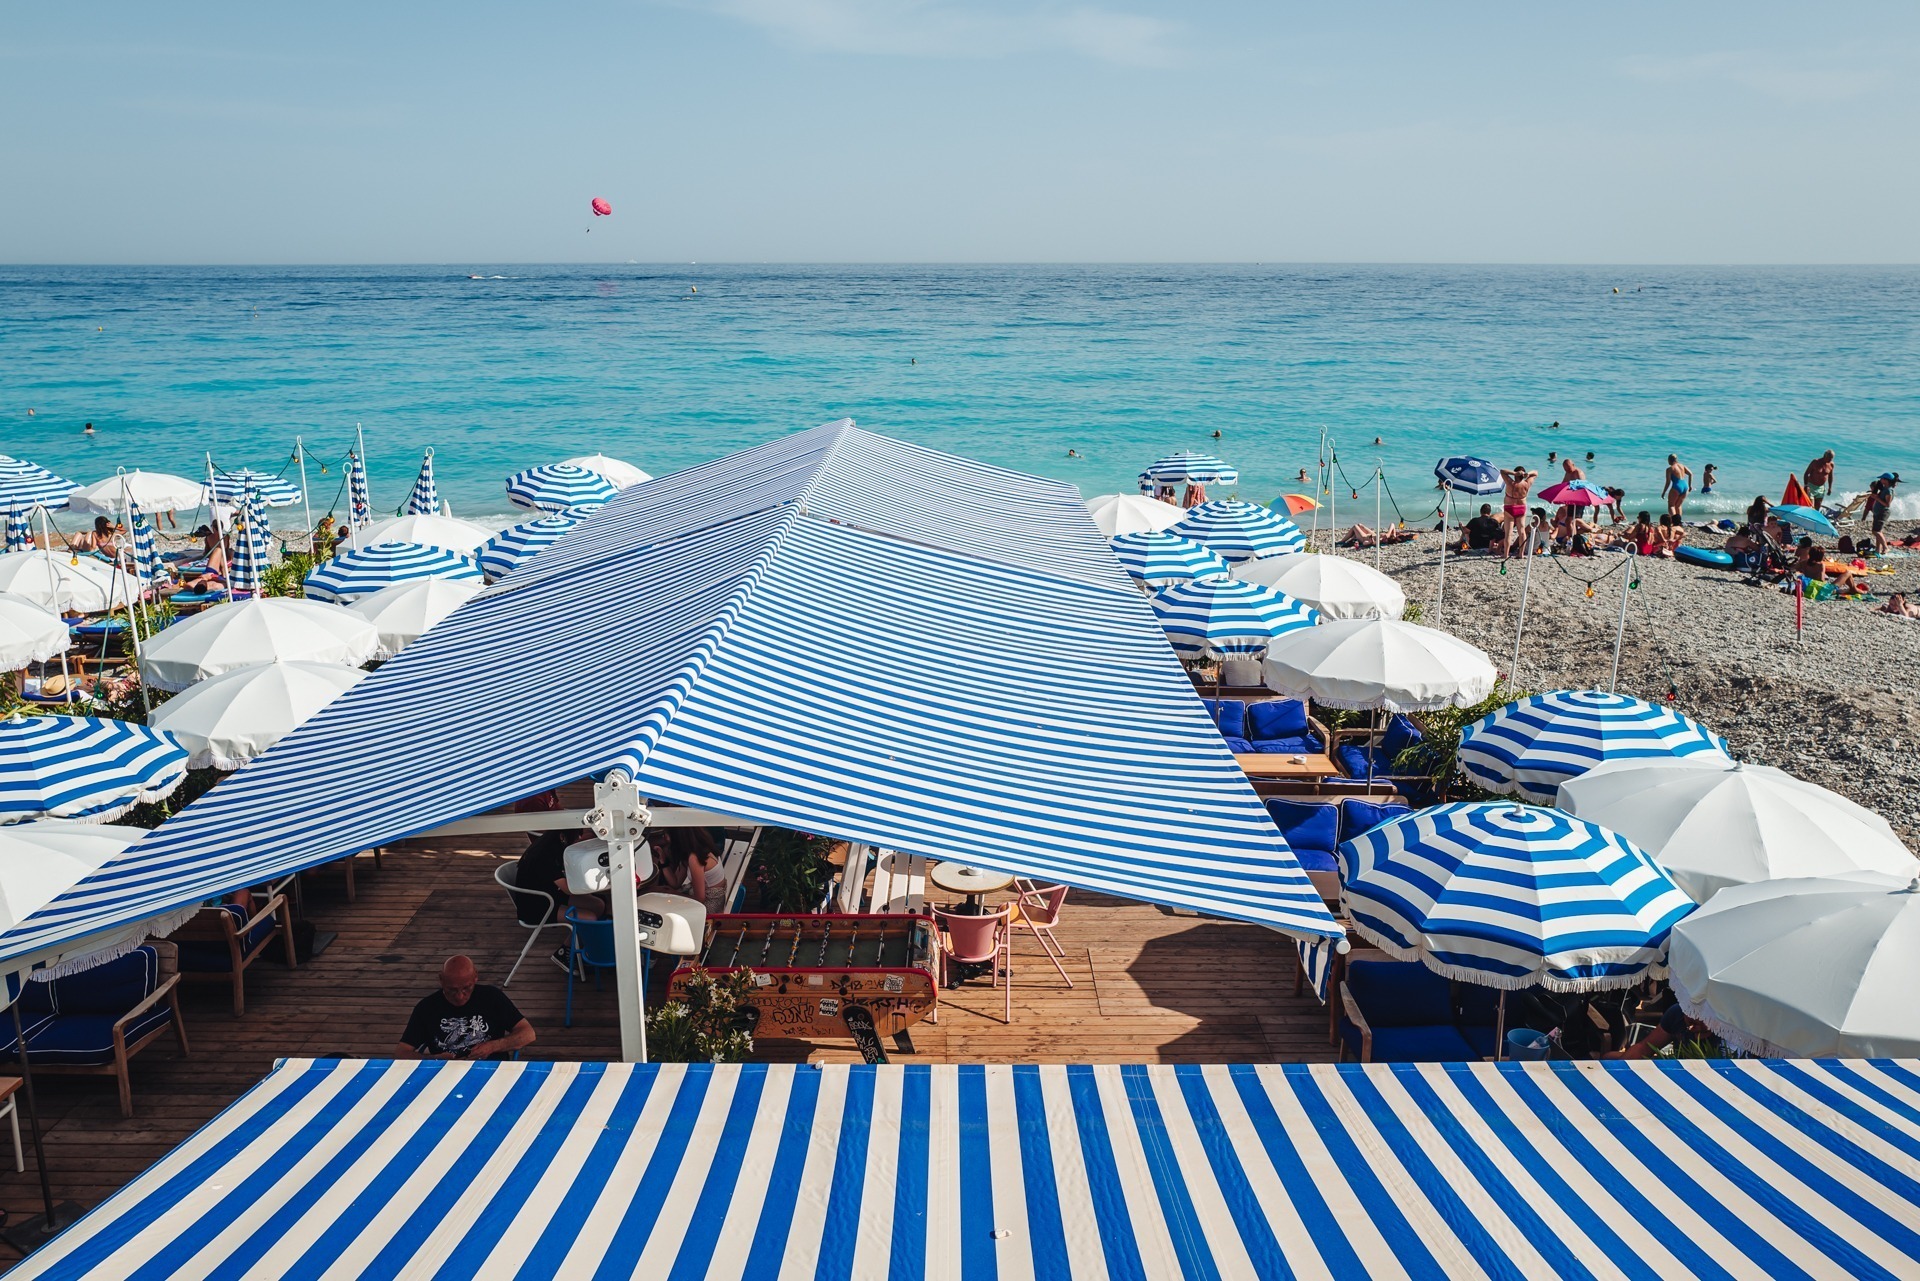 Nice, France-June 2022: life by The beautiful stone beach